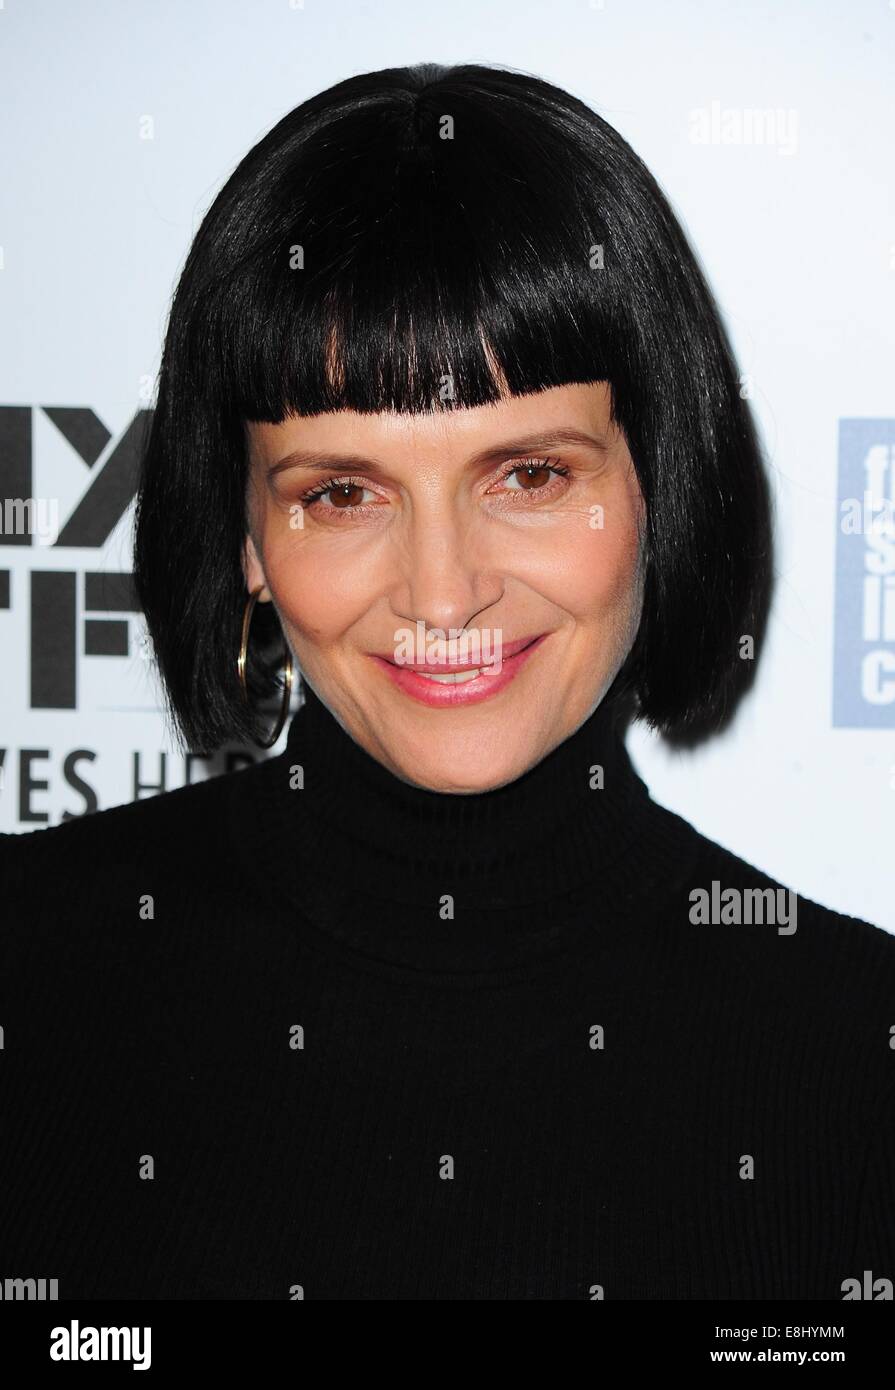 New York, USA. 8th October, 2014. Juliette Binoche at arrivals for CLOUDS OF SILS MARIA Premiere at the 52nd New York Film Festival, Alice Tully Hall at Lincoln Center, new, NY October 8, 2014. Photo By: Gregorio T. Binuya/Everett Collection/ Alamy Live News Stock Photo